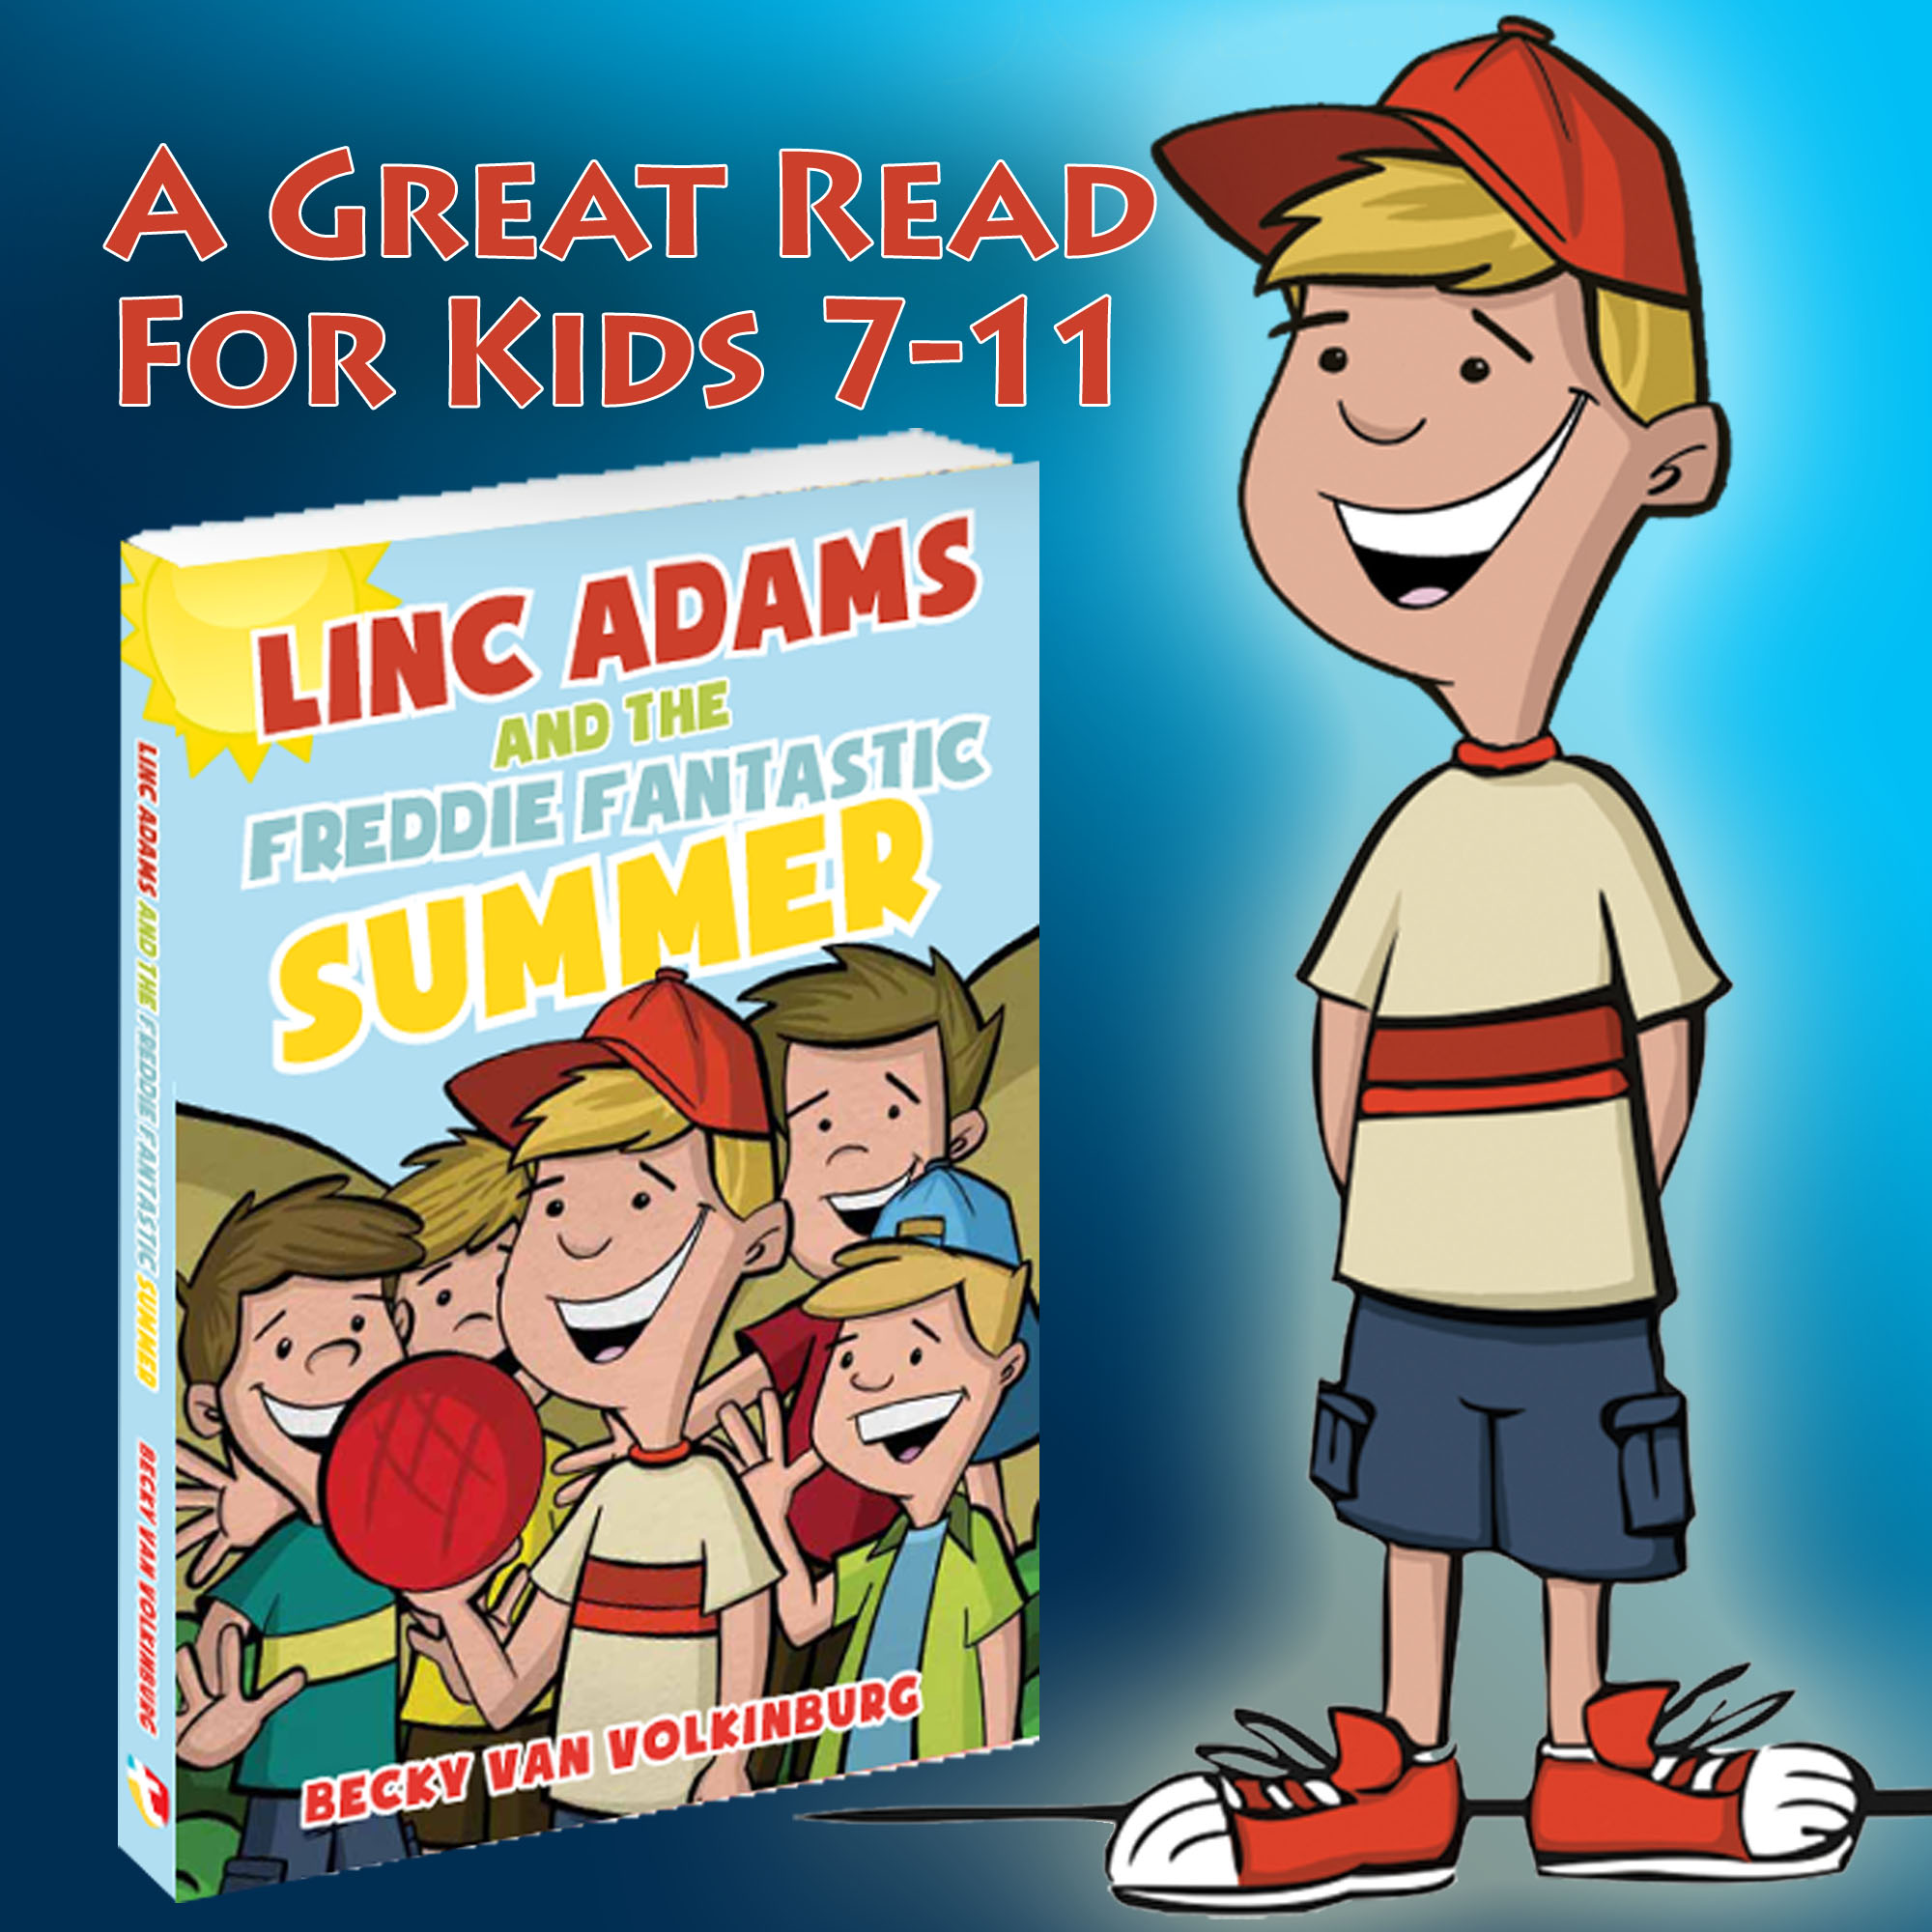 Linc Adams and the Freddie Fantastic Summer, a great read for kids 7-11